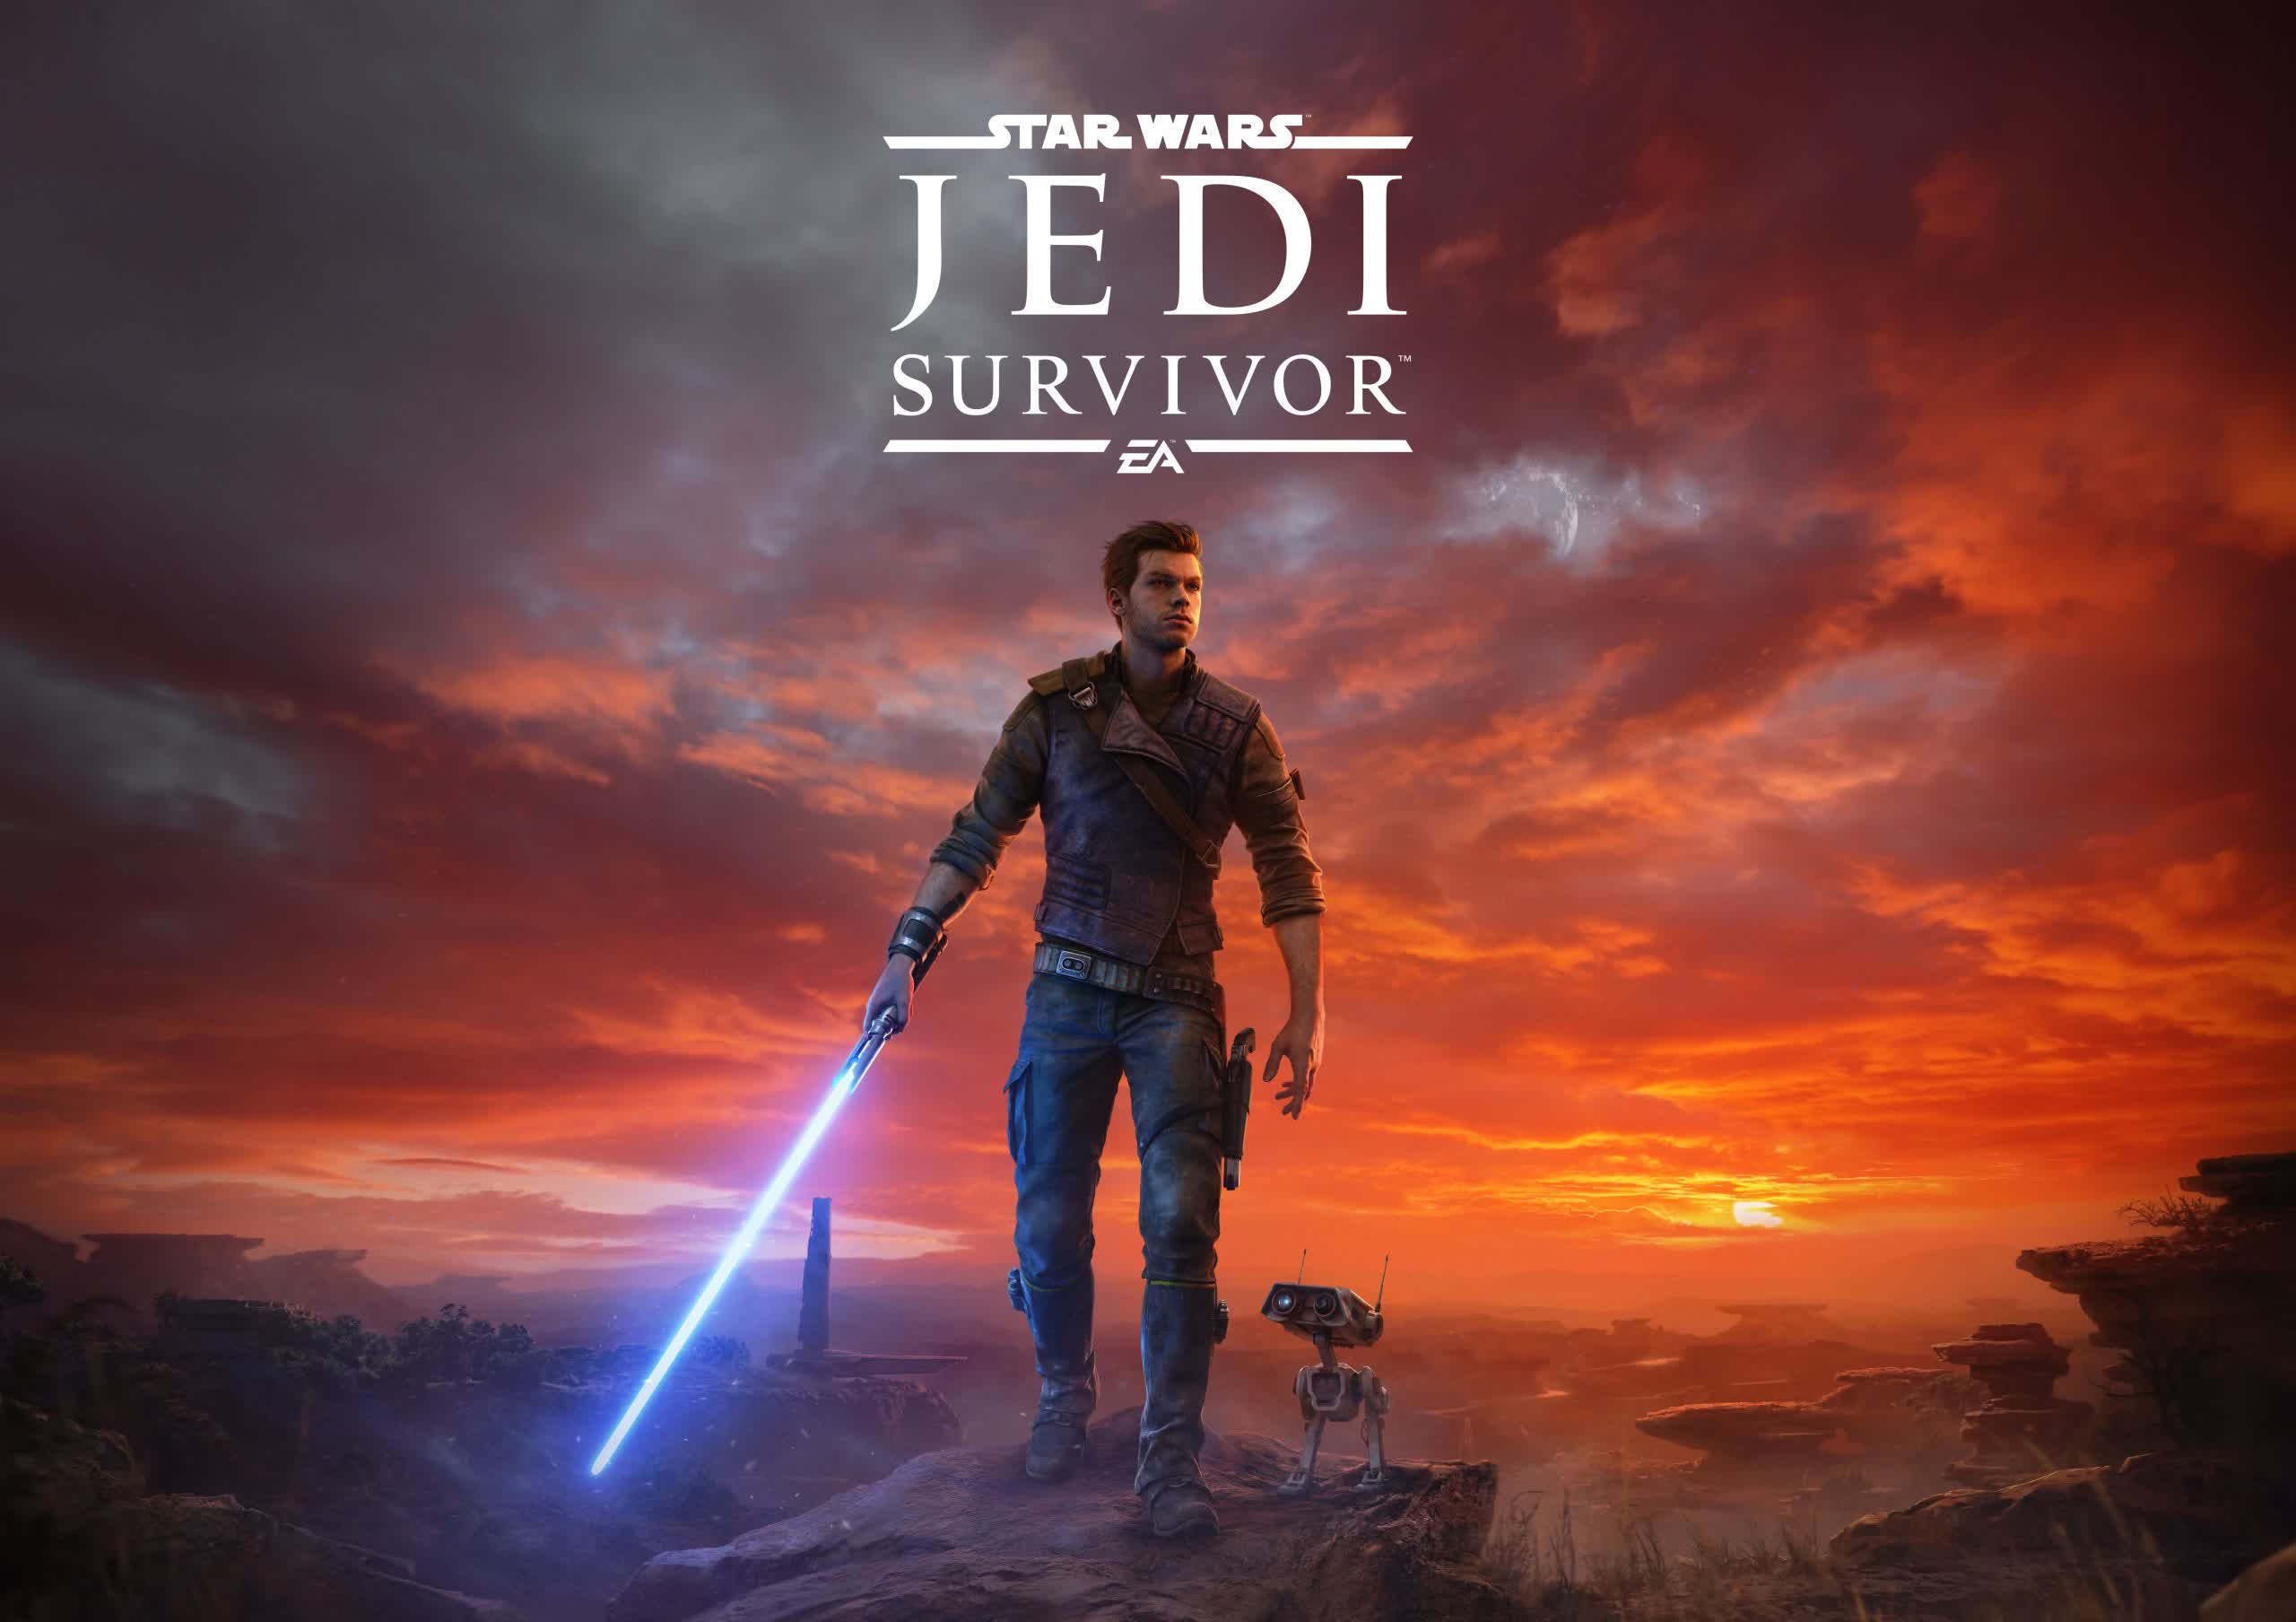 Star Wars Jedi: Survivor might launch on March 15, system requirements leaked